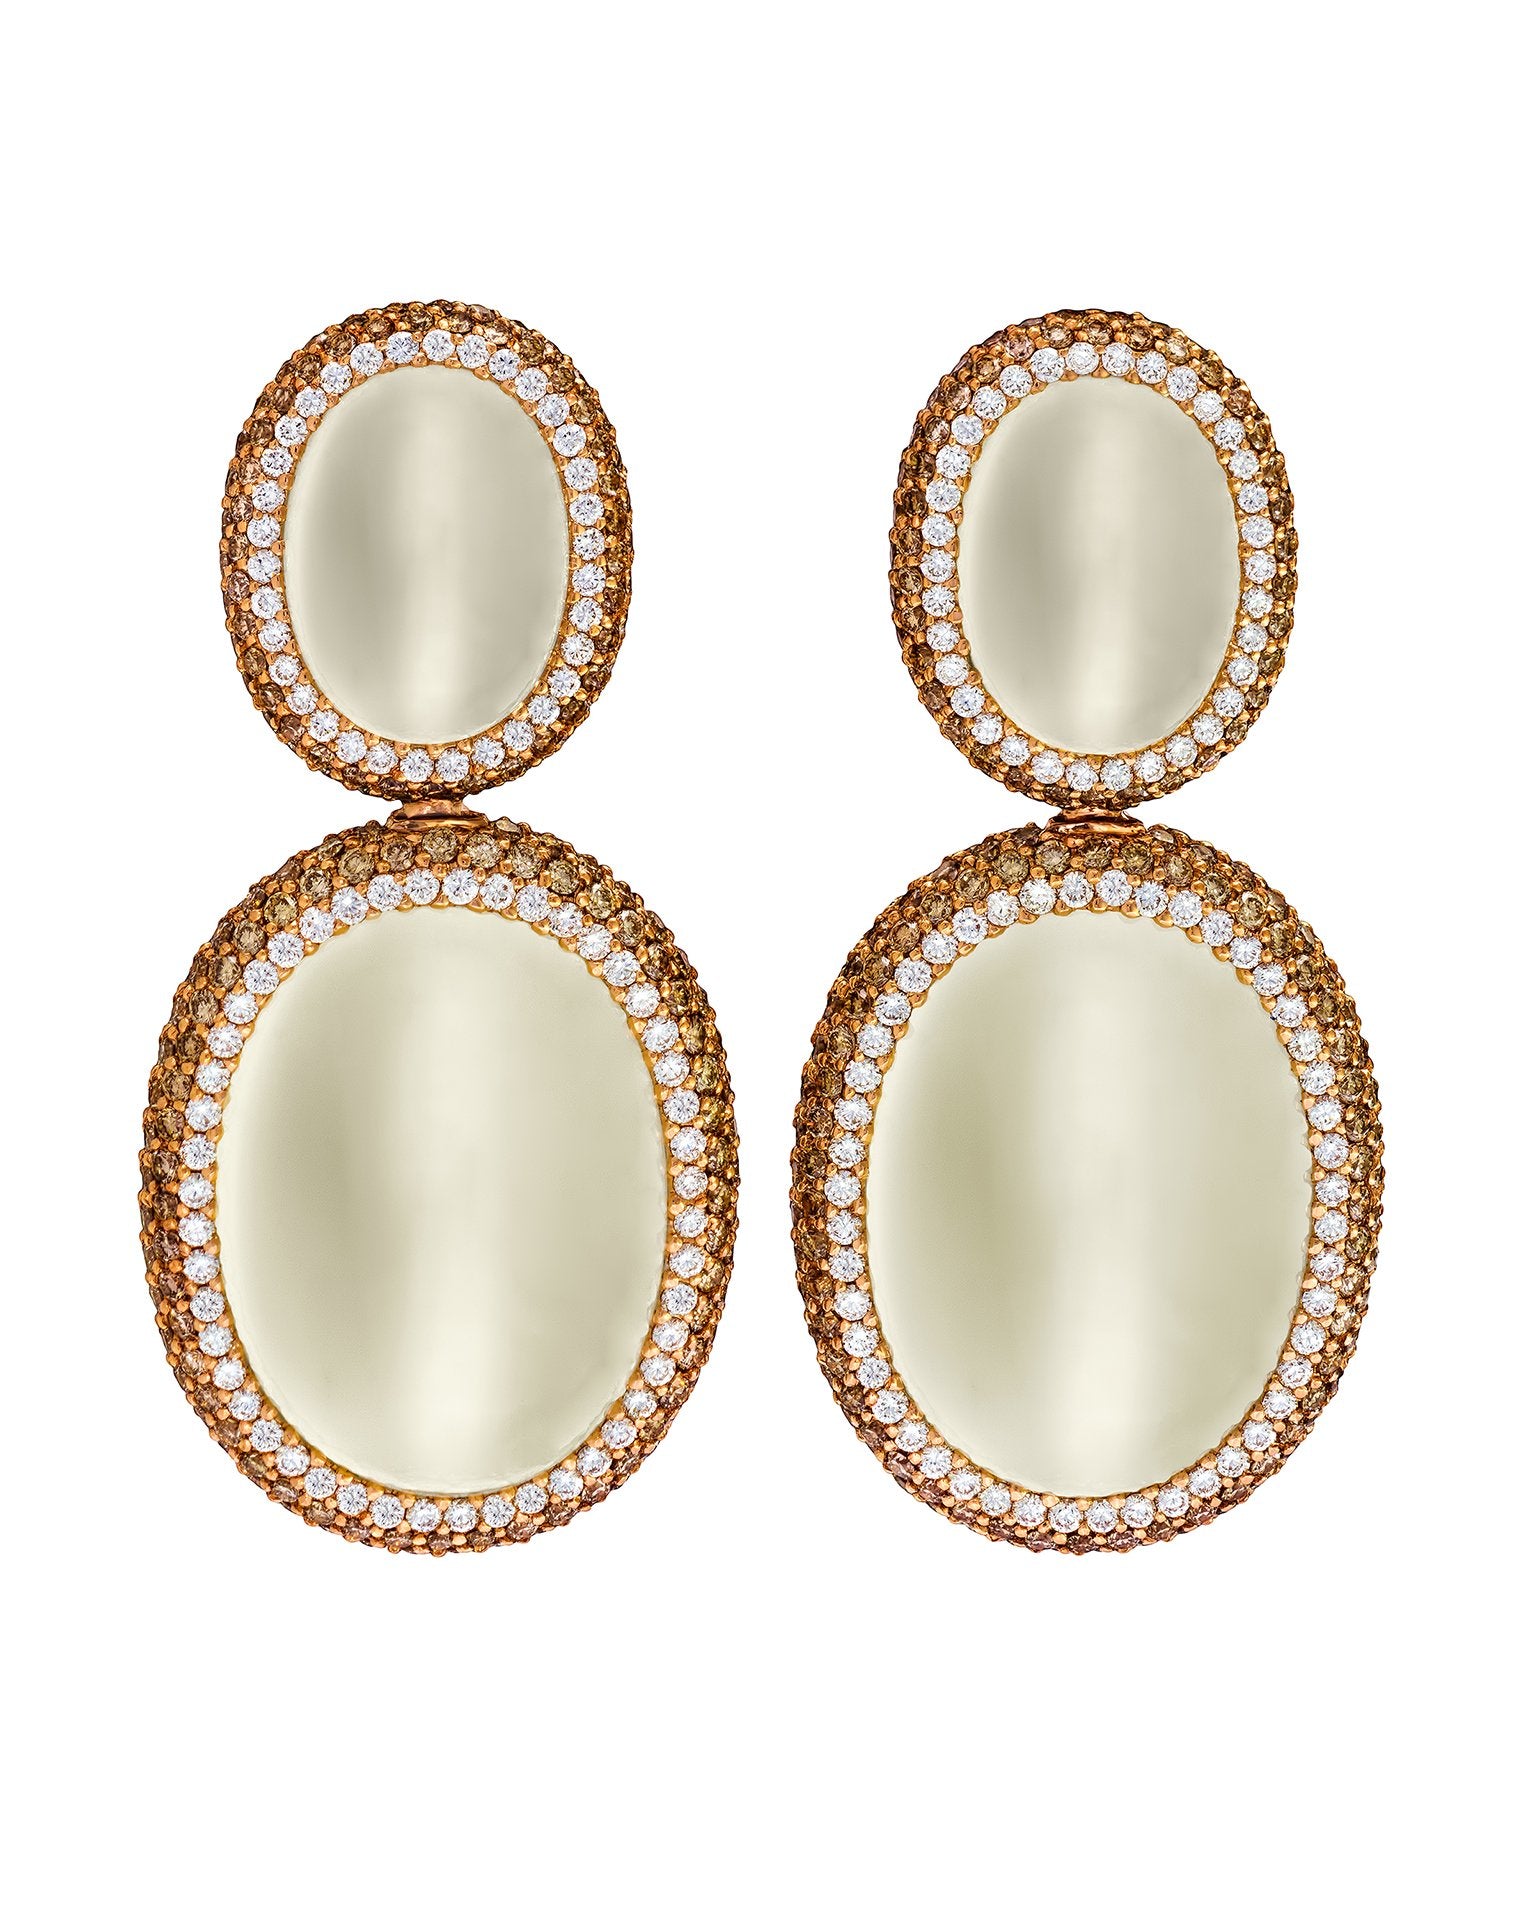 Moonstone pendant earrings set with brown and white diamonds, crafted in 18 karat rose gold.